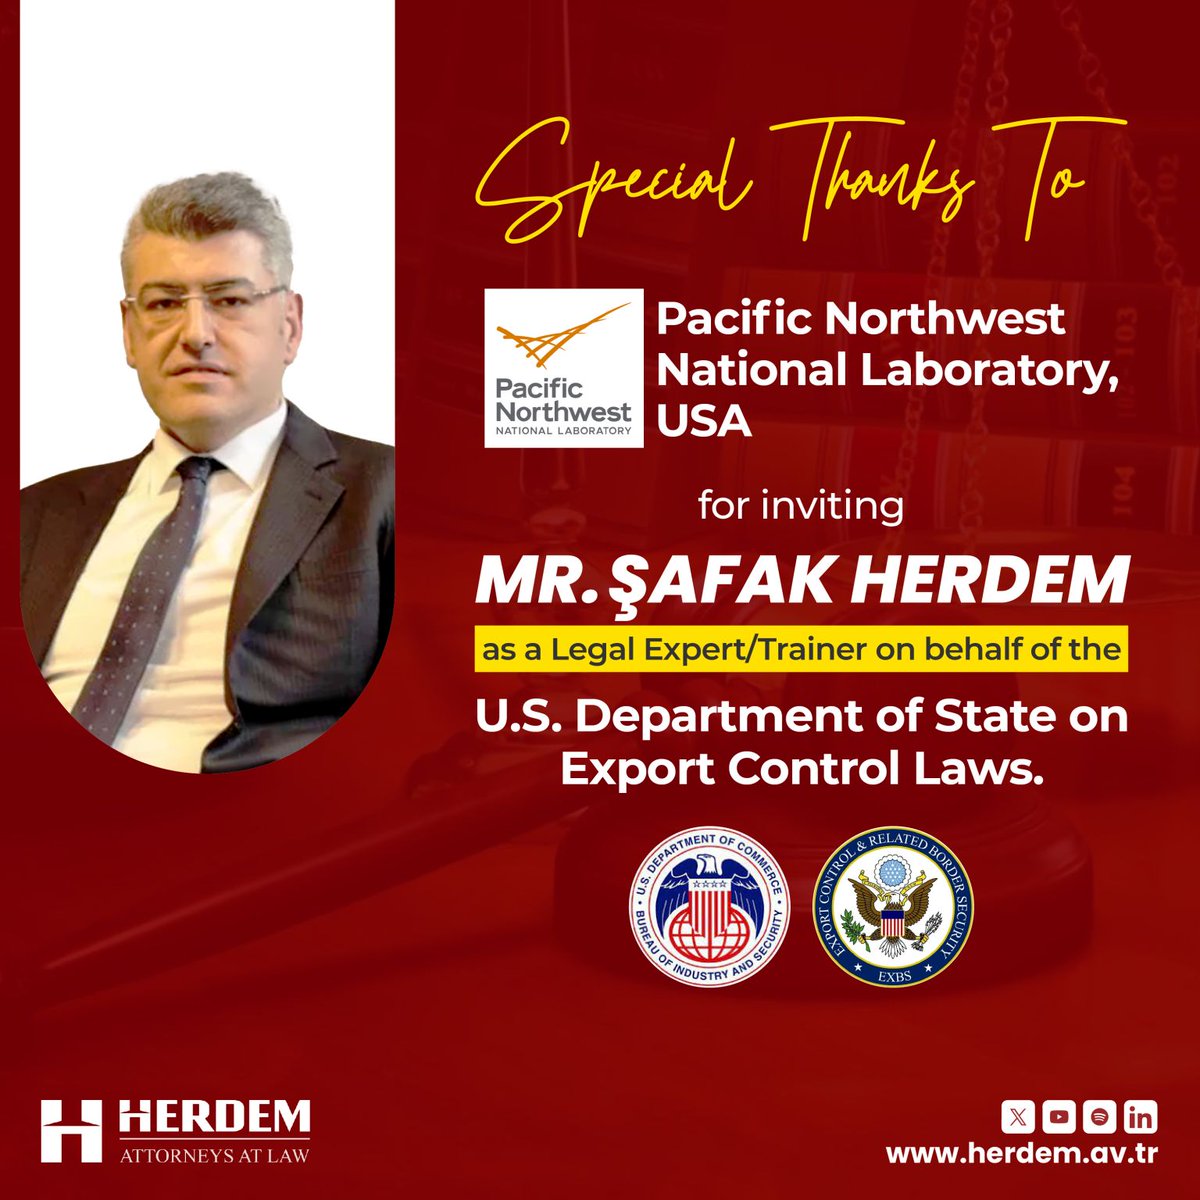 𝐄𝐱𝐜𝐢𝐭𝐢𝐧𝐠 𝐍𝐞𝐰𝐬 𝐀𝐥𝐞𝐫𝐭! Hats off to the Pacific Northwest National Laboratory in the United States for extending a warm invitation to none other than Mr. Safak Herdem! 
#ExportControl #GlobalExpertise #USDeptofState #Thankful #StayTuned #herdem #attorneysatlaw #US